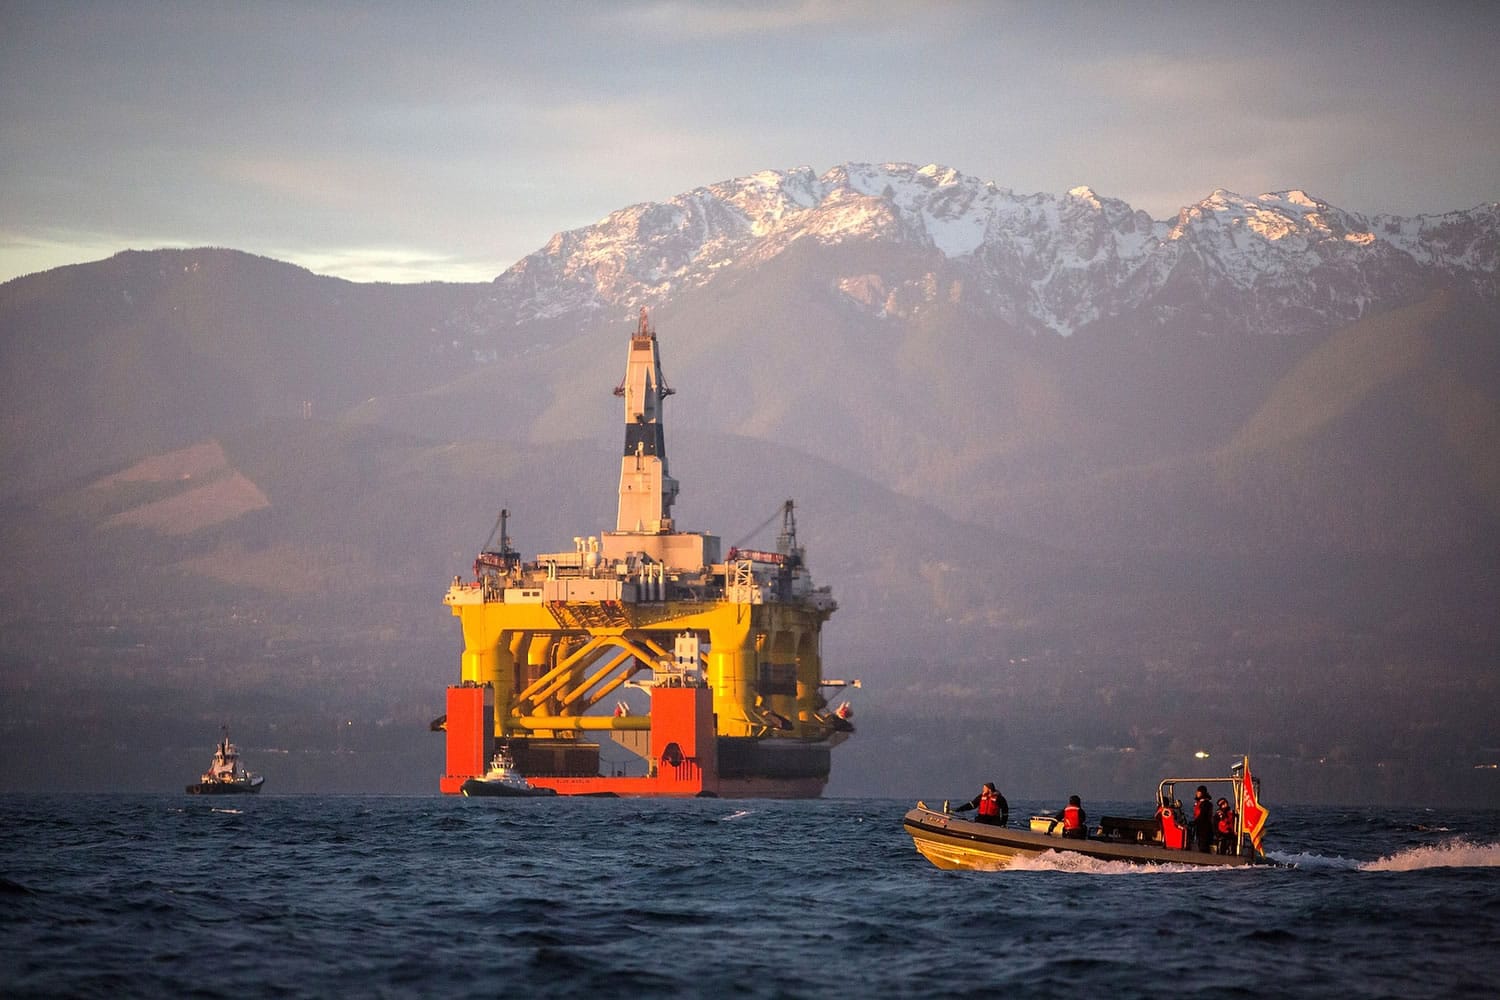 Associated Press files
A small boat crosses in front of an oil drilling rig as it arrives in Port Angeles aboard a transport ship after traveling across the Pacific.